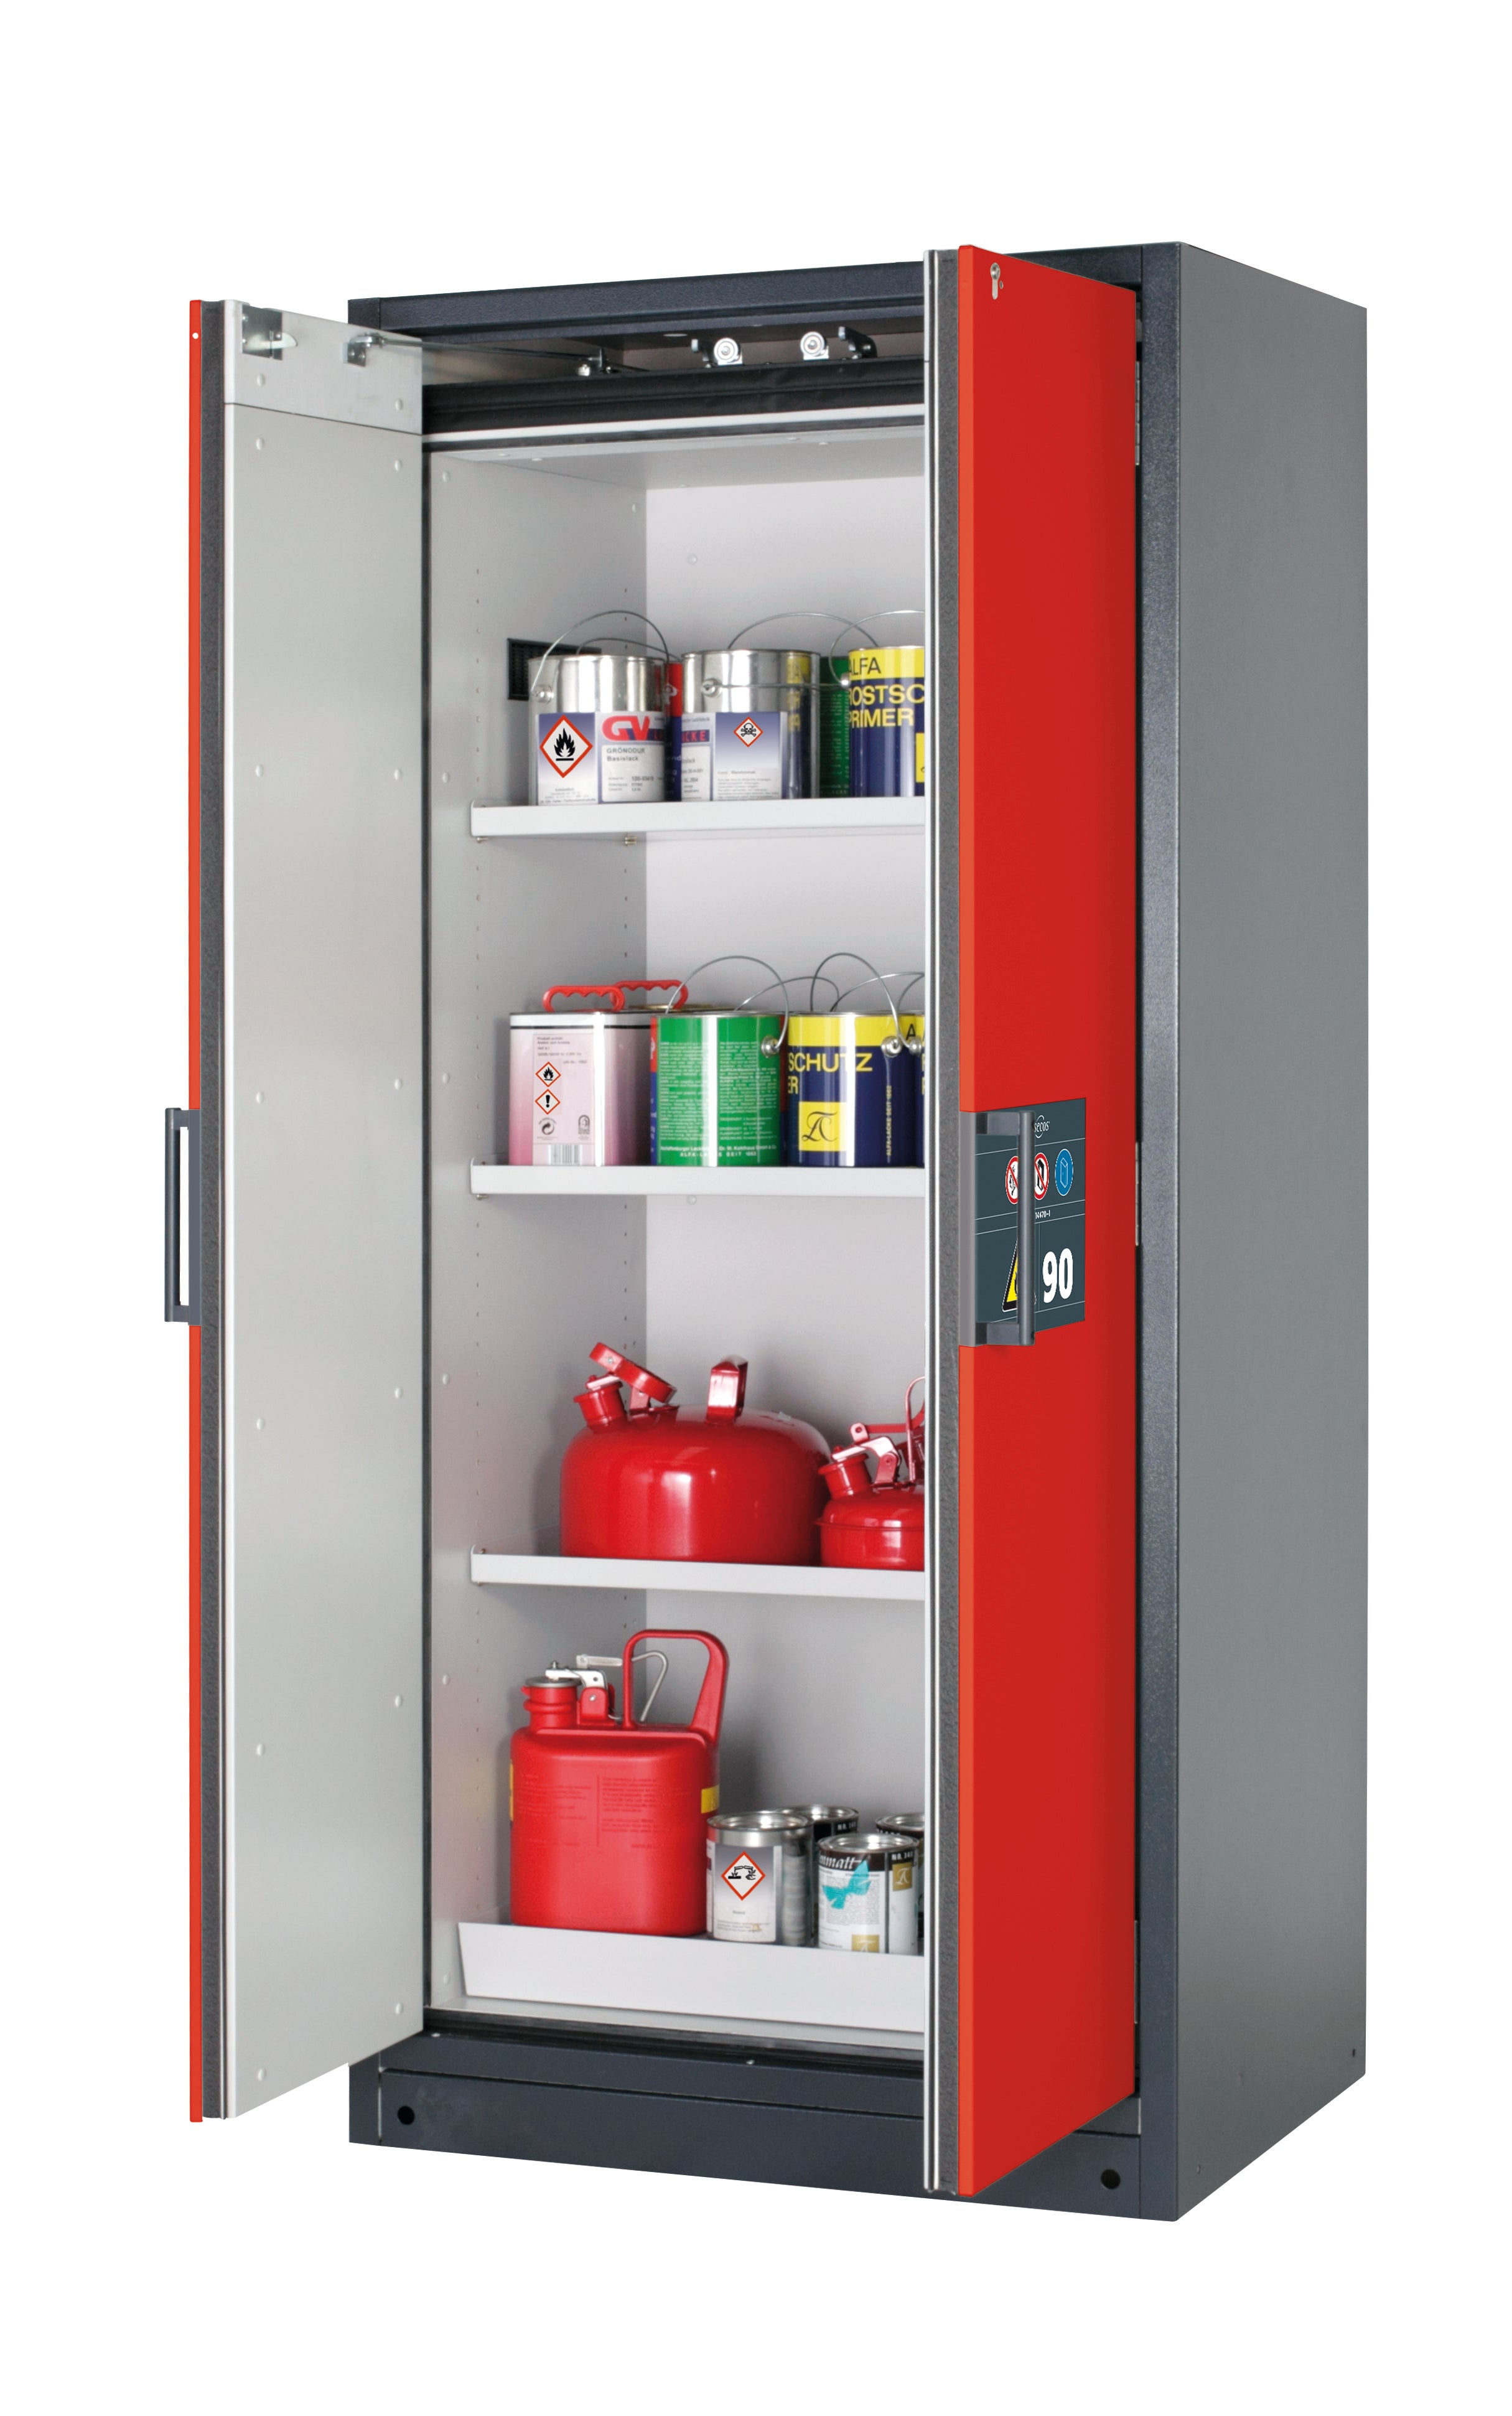 Type 90 safety storage cabinet Q-CLASSIC-90 model Q90.195.090 in traffic red RAL 3020 with 3x shelf standard (sheet steel),